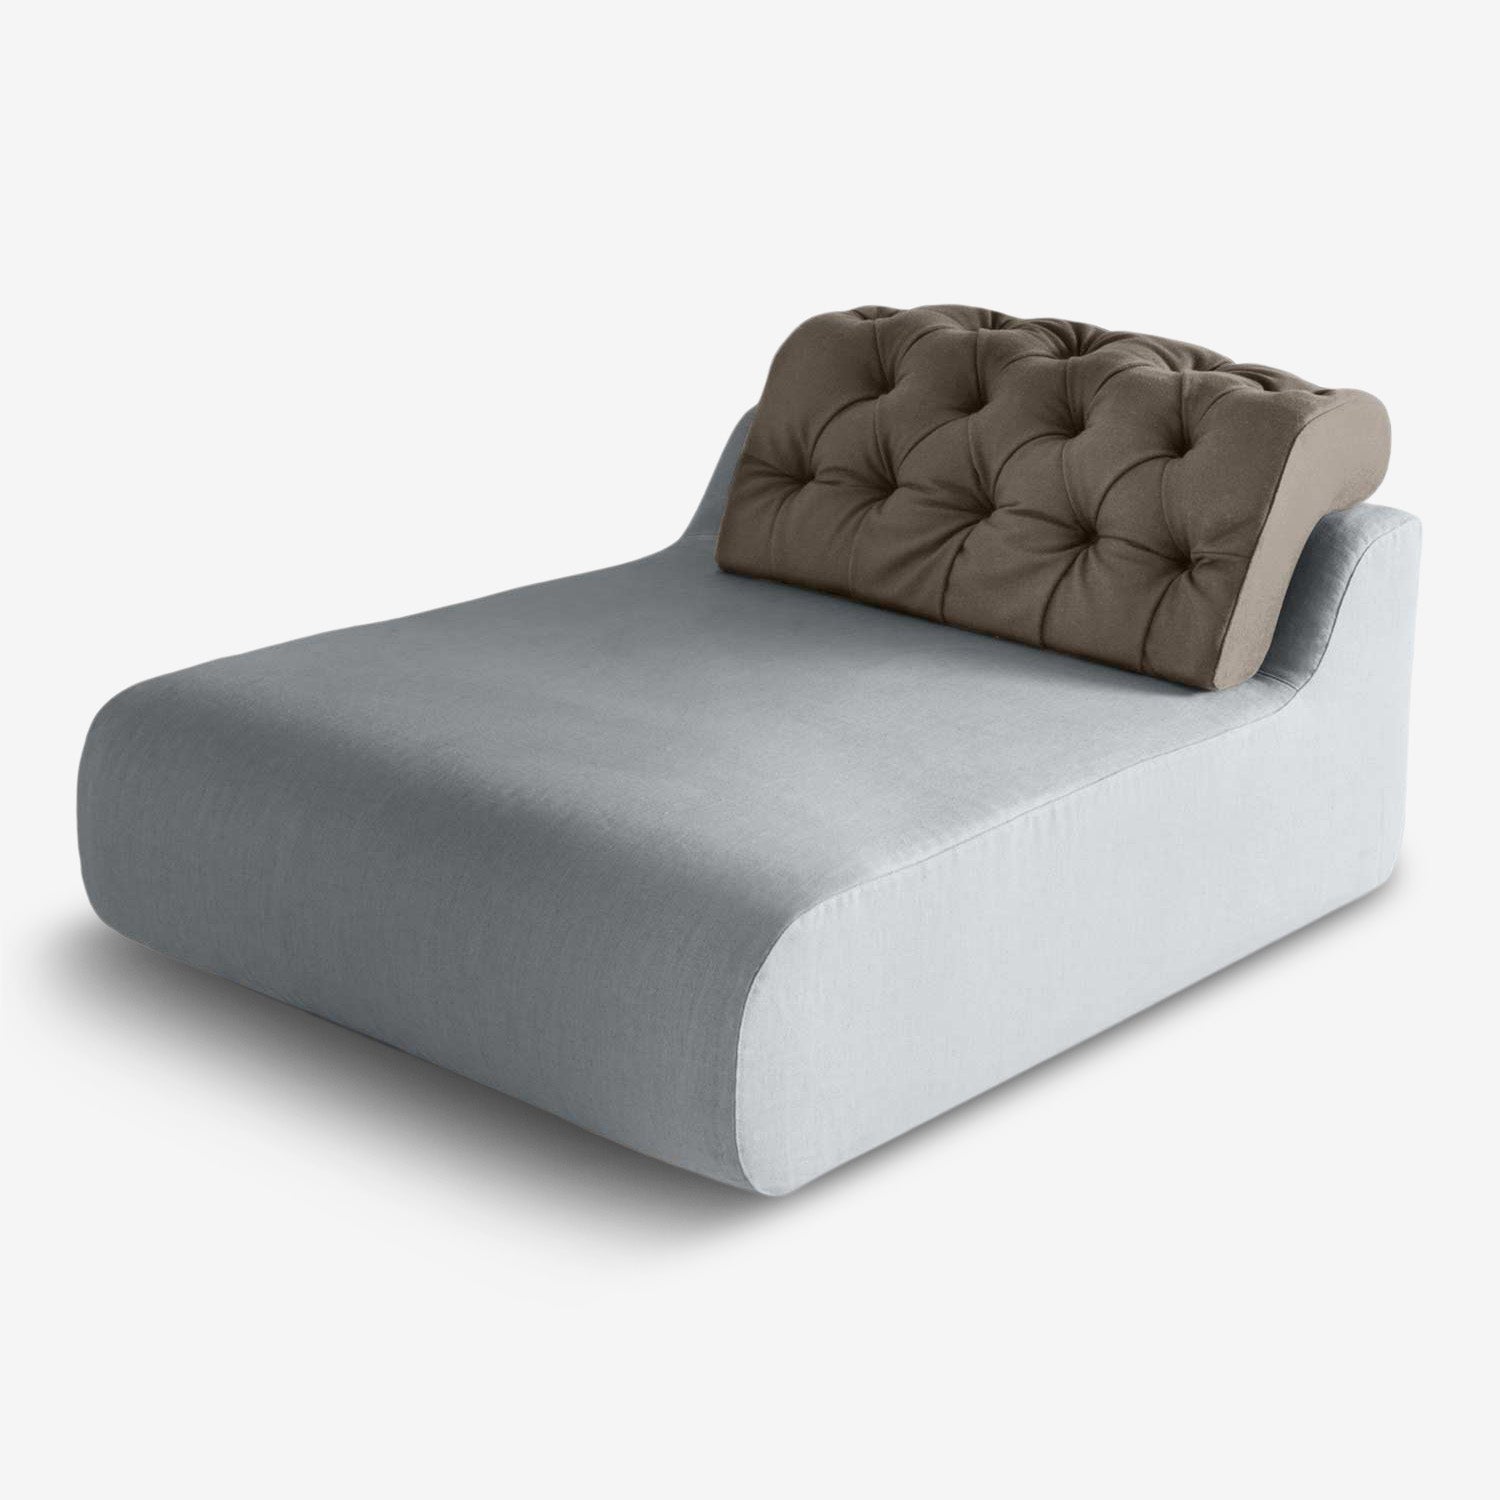 baco eco friendly chaise longue sofa in grey cotton textile with greay natural velvet backrest